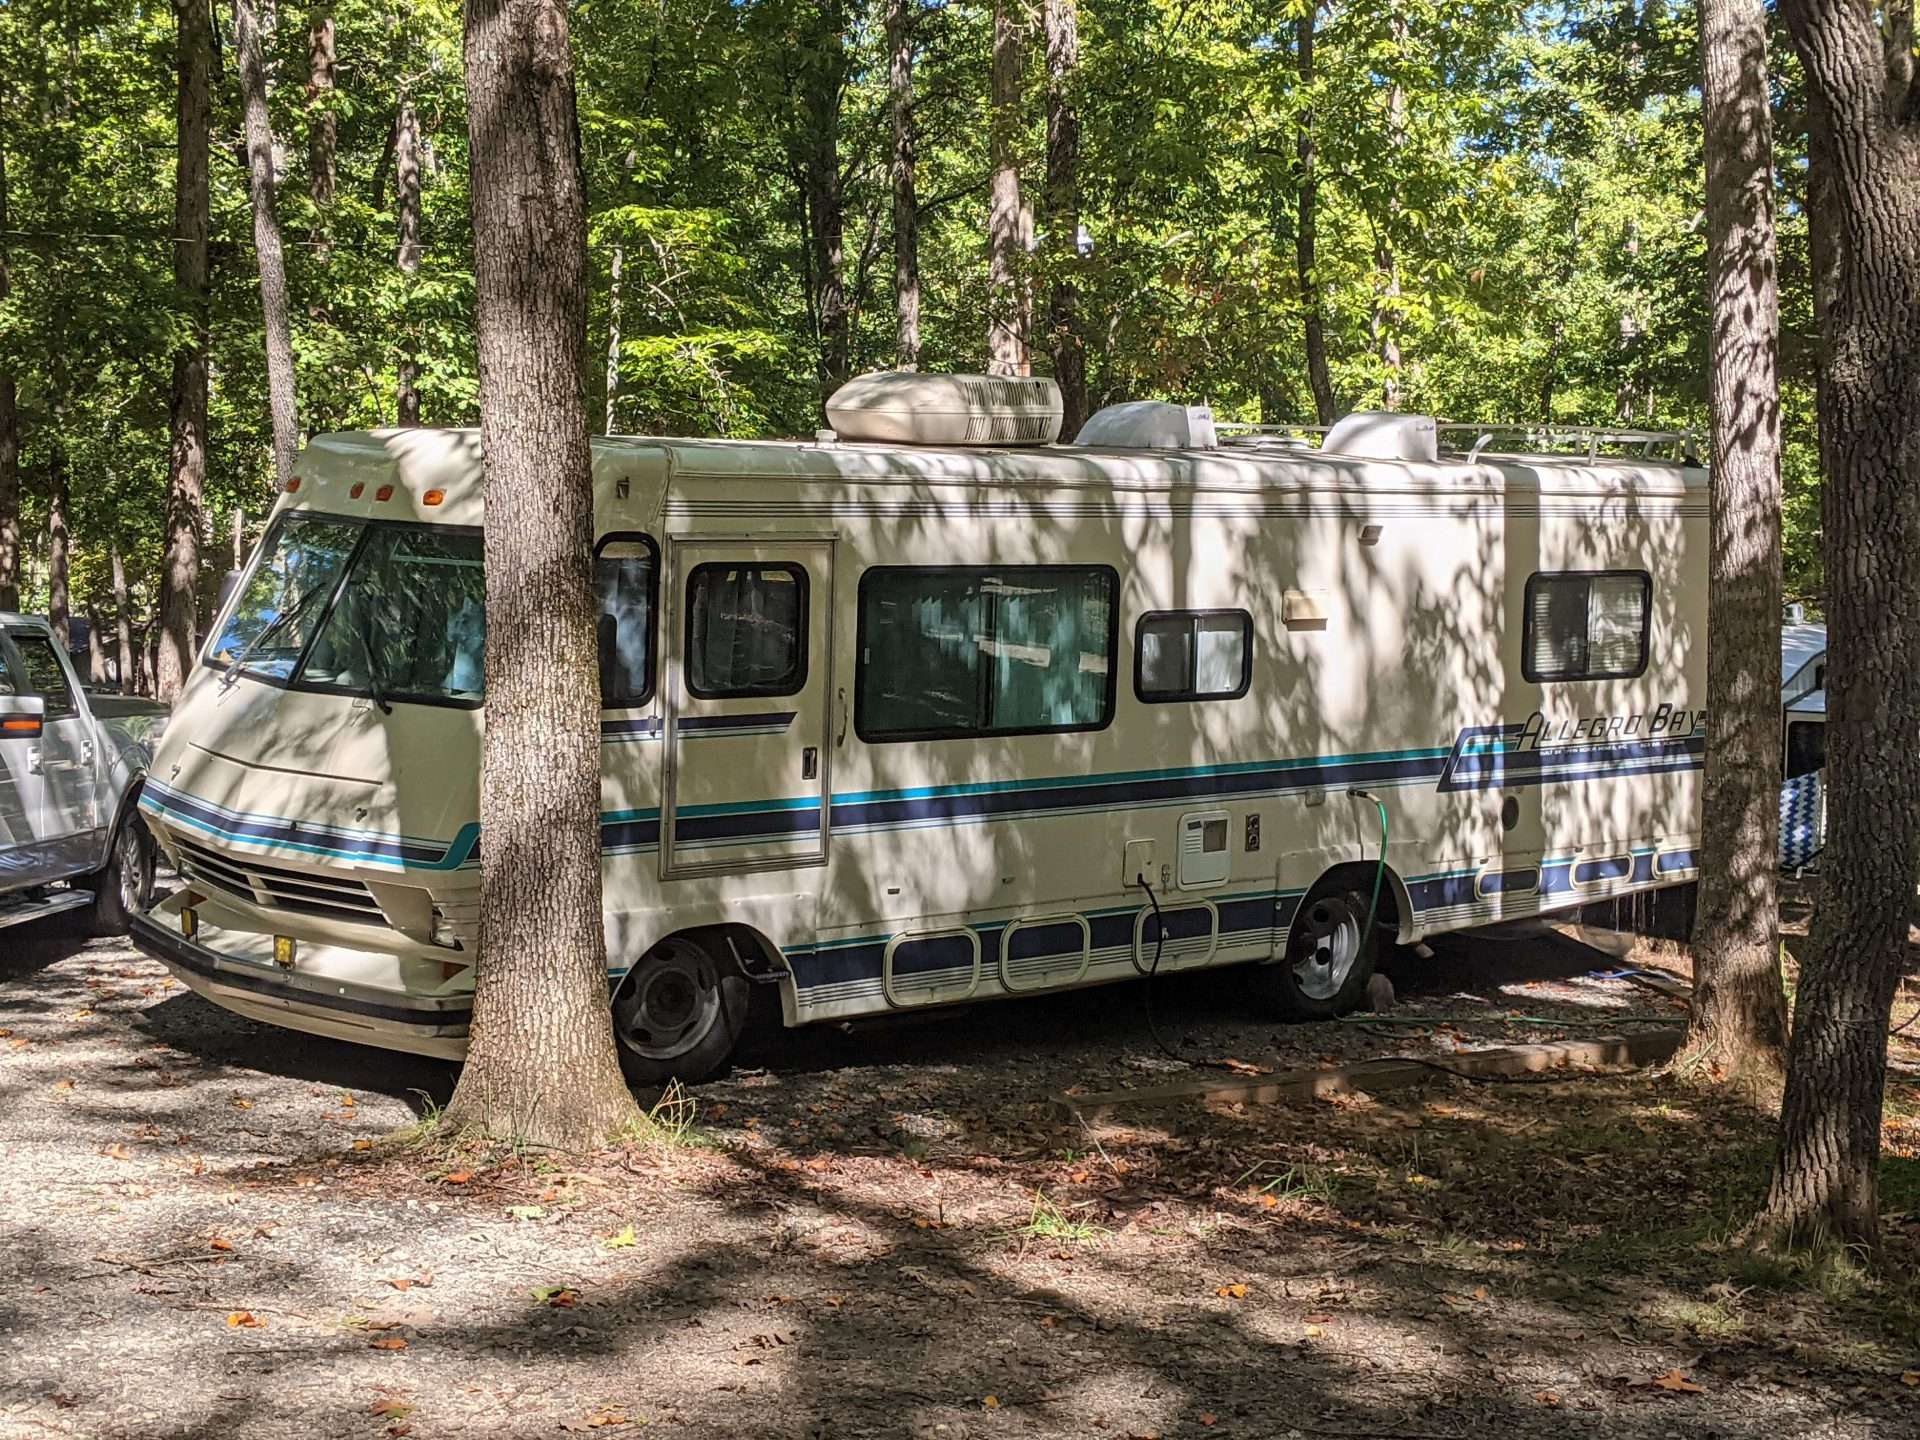 Long Class C Rv parked in state park